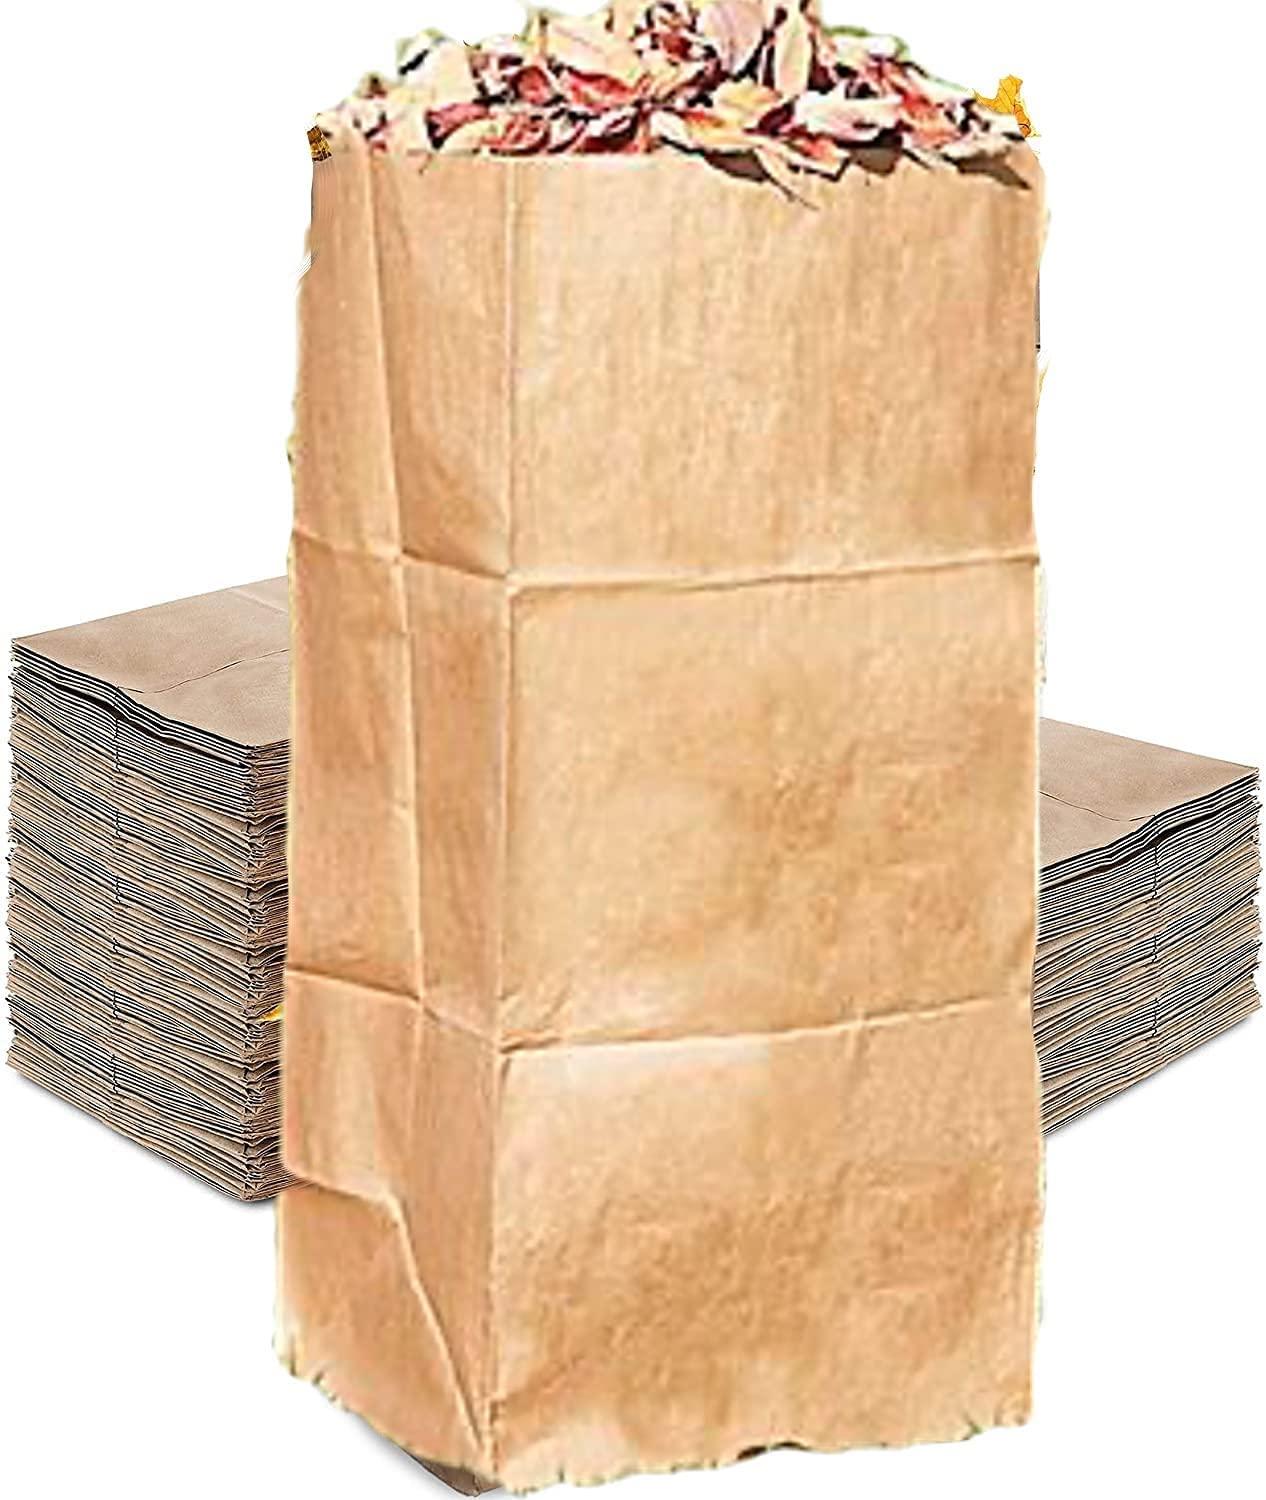 Rocky Mountain Goods Yard Waste Bags - Large 30 Gallon Brown Paper Leaf Bags  for Yard / Garden - Environmental Friendly Lawn Bags - Tear Resistant  Refuse Yard Bags - Heavy Duty 2 Ply Self Standing (5)